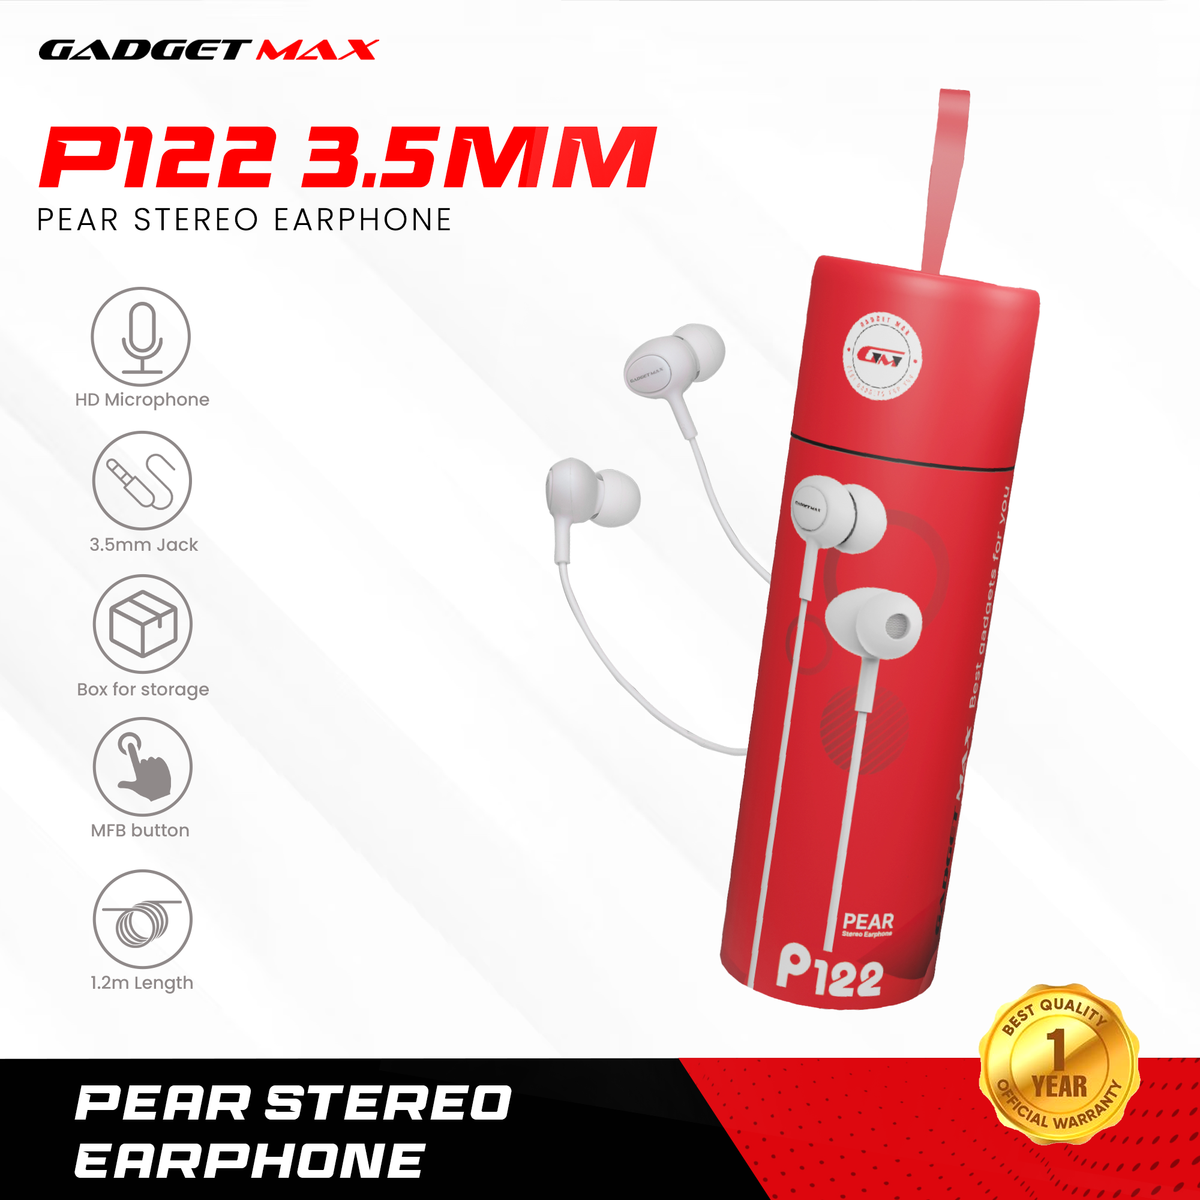 GADGET MAX P122 PEAR STEREO EARPHONE (3.5MM) WIRED EARPHONE - WHITE